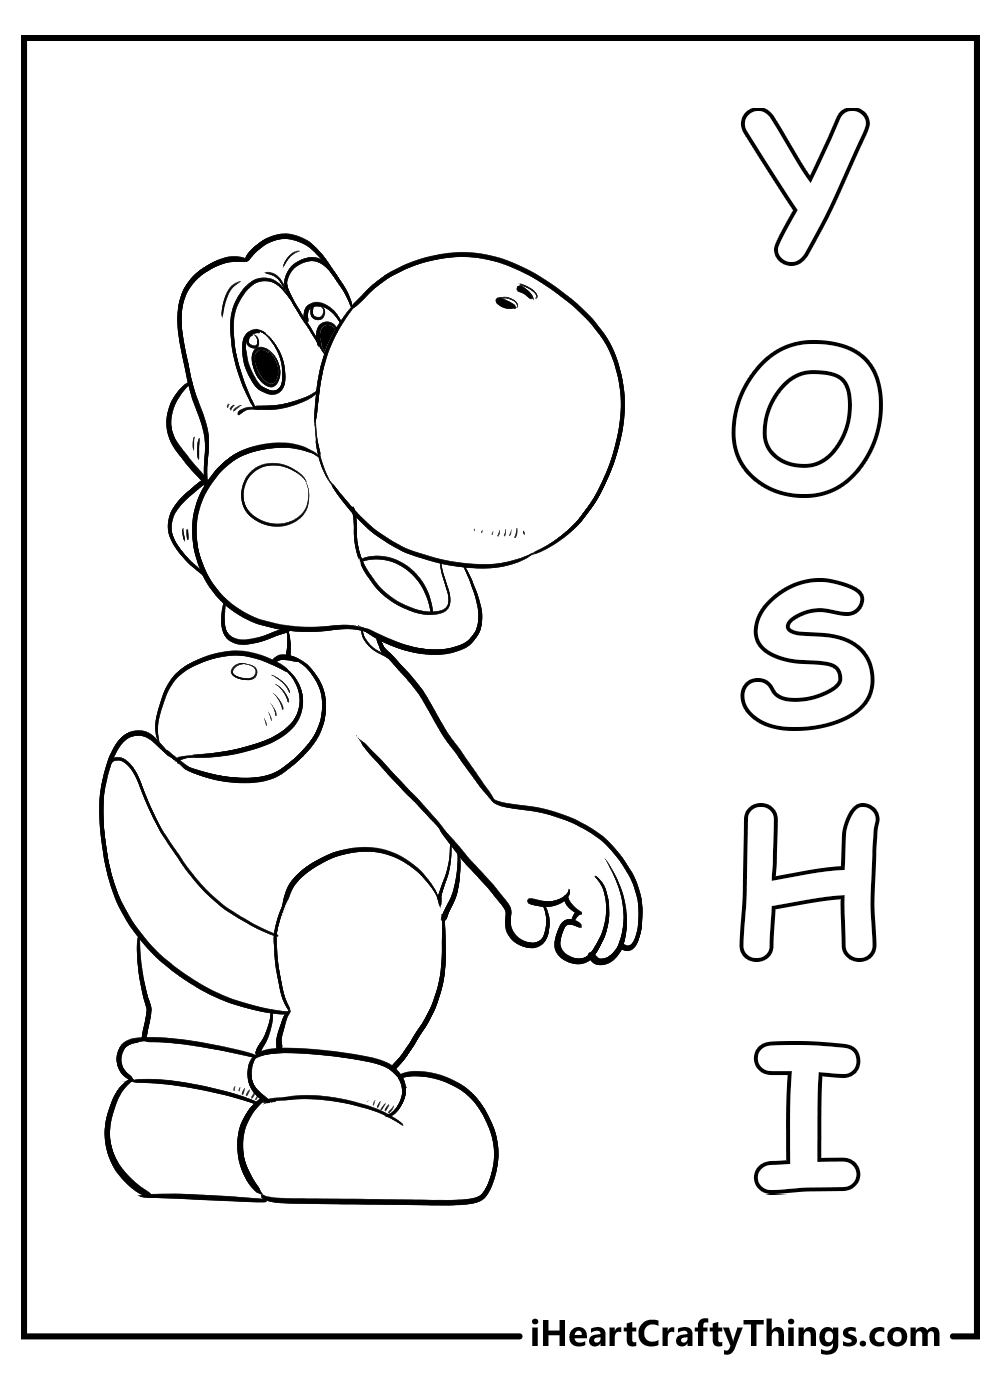 cool yoshi coloring pages